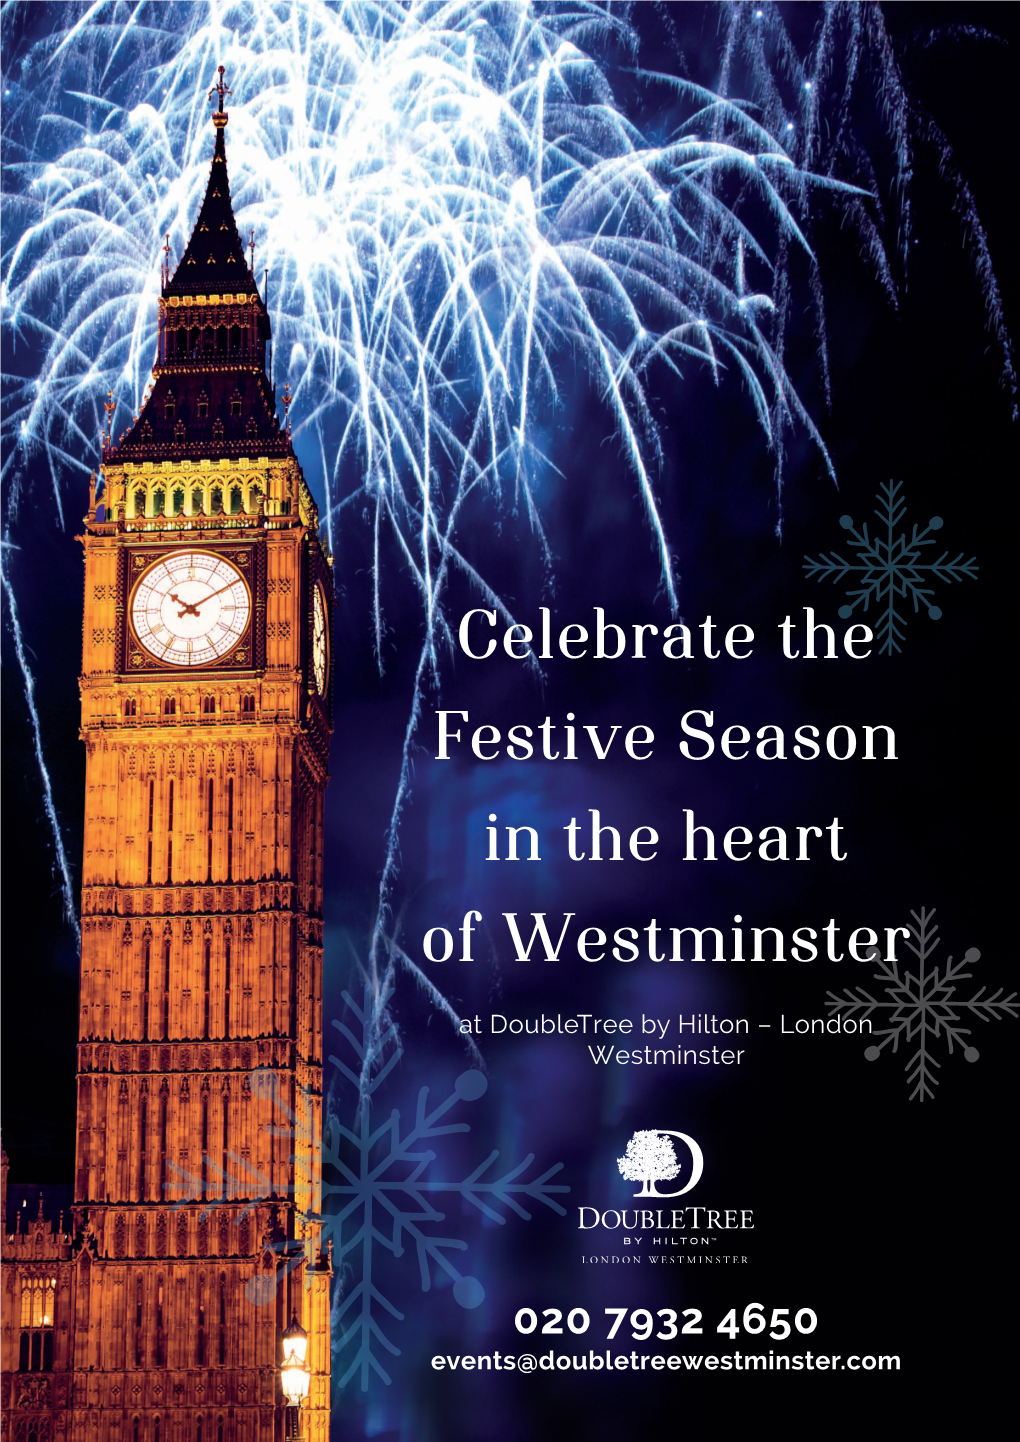 Celebrate the Festive Season in the Heart of Westminster